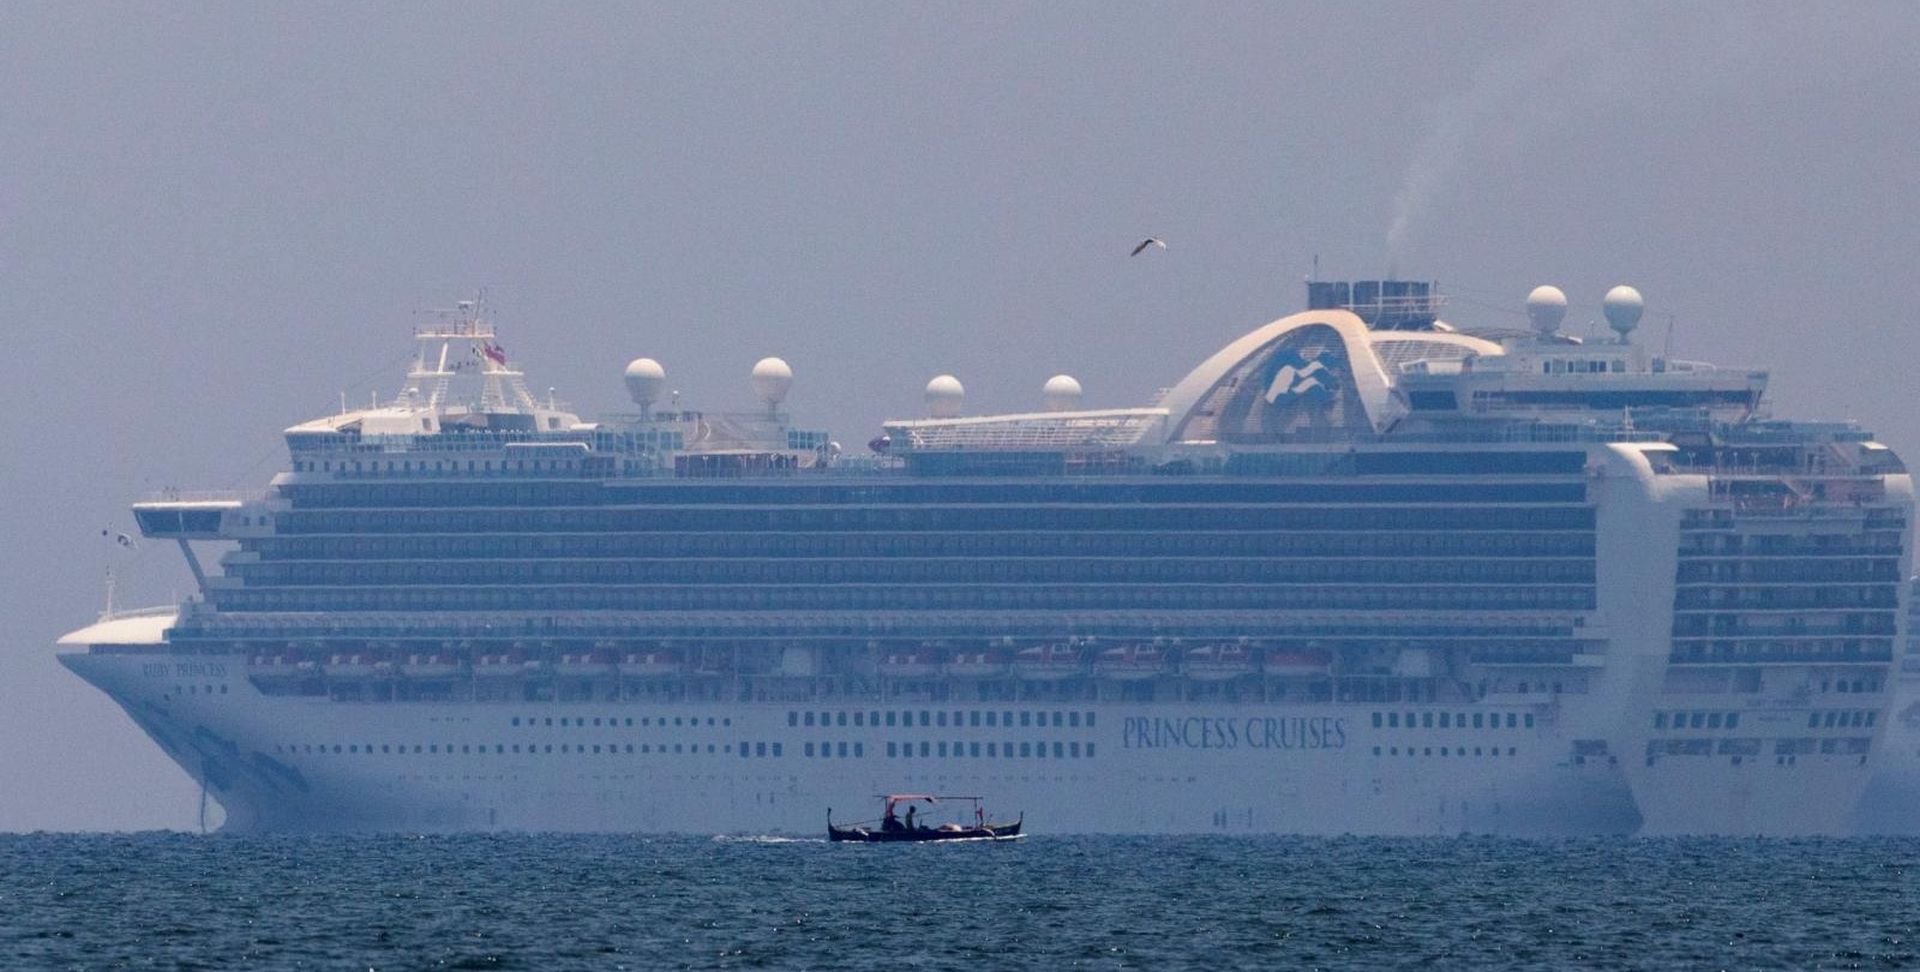 Princess Cruises' Ruby Princess cruise ship docks in Manila Bay A fishing boat sails past the Princess Cruises' Ruby Princess cruise ship as it docks in Manila Bay during the coronavirus disease (COVID-19) outbreak, in Cavite City, Philippines, May 7, 2020. REUTERS/Eloisa Lopez ELOISA LOPEZ